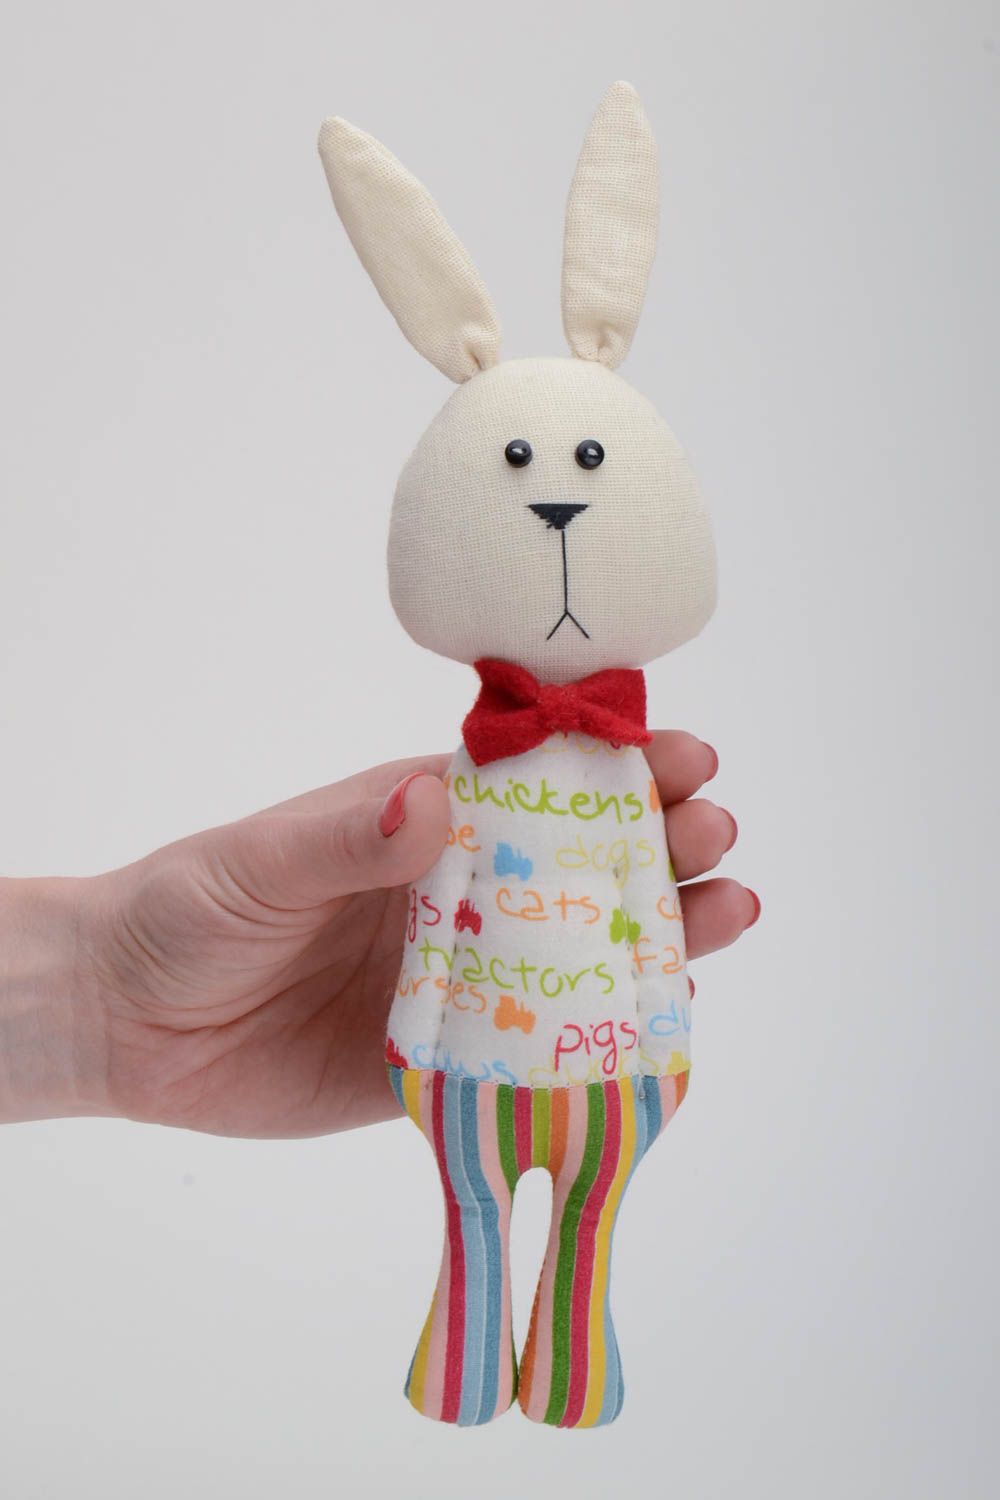 Handmade small cotton fabric soft toy rabbit in striped trousers with red bow tie photo 5